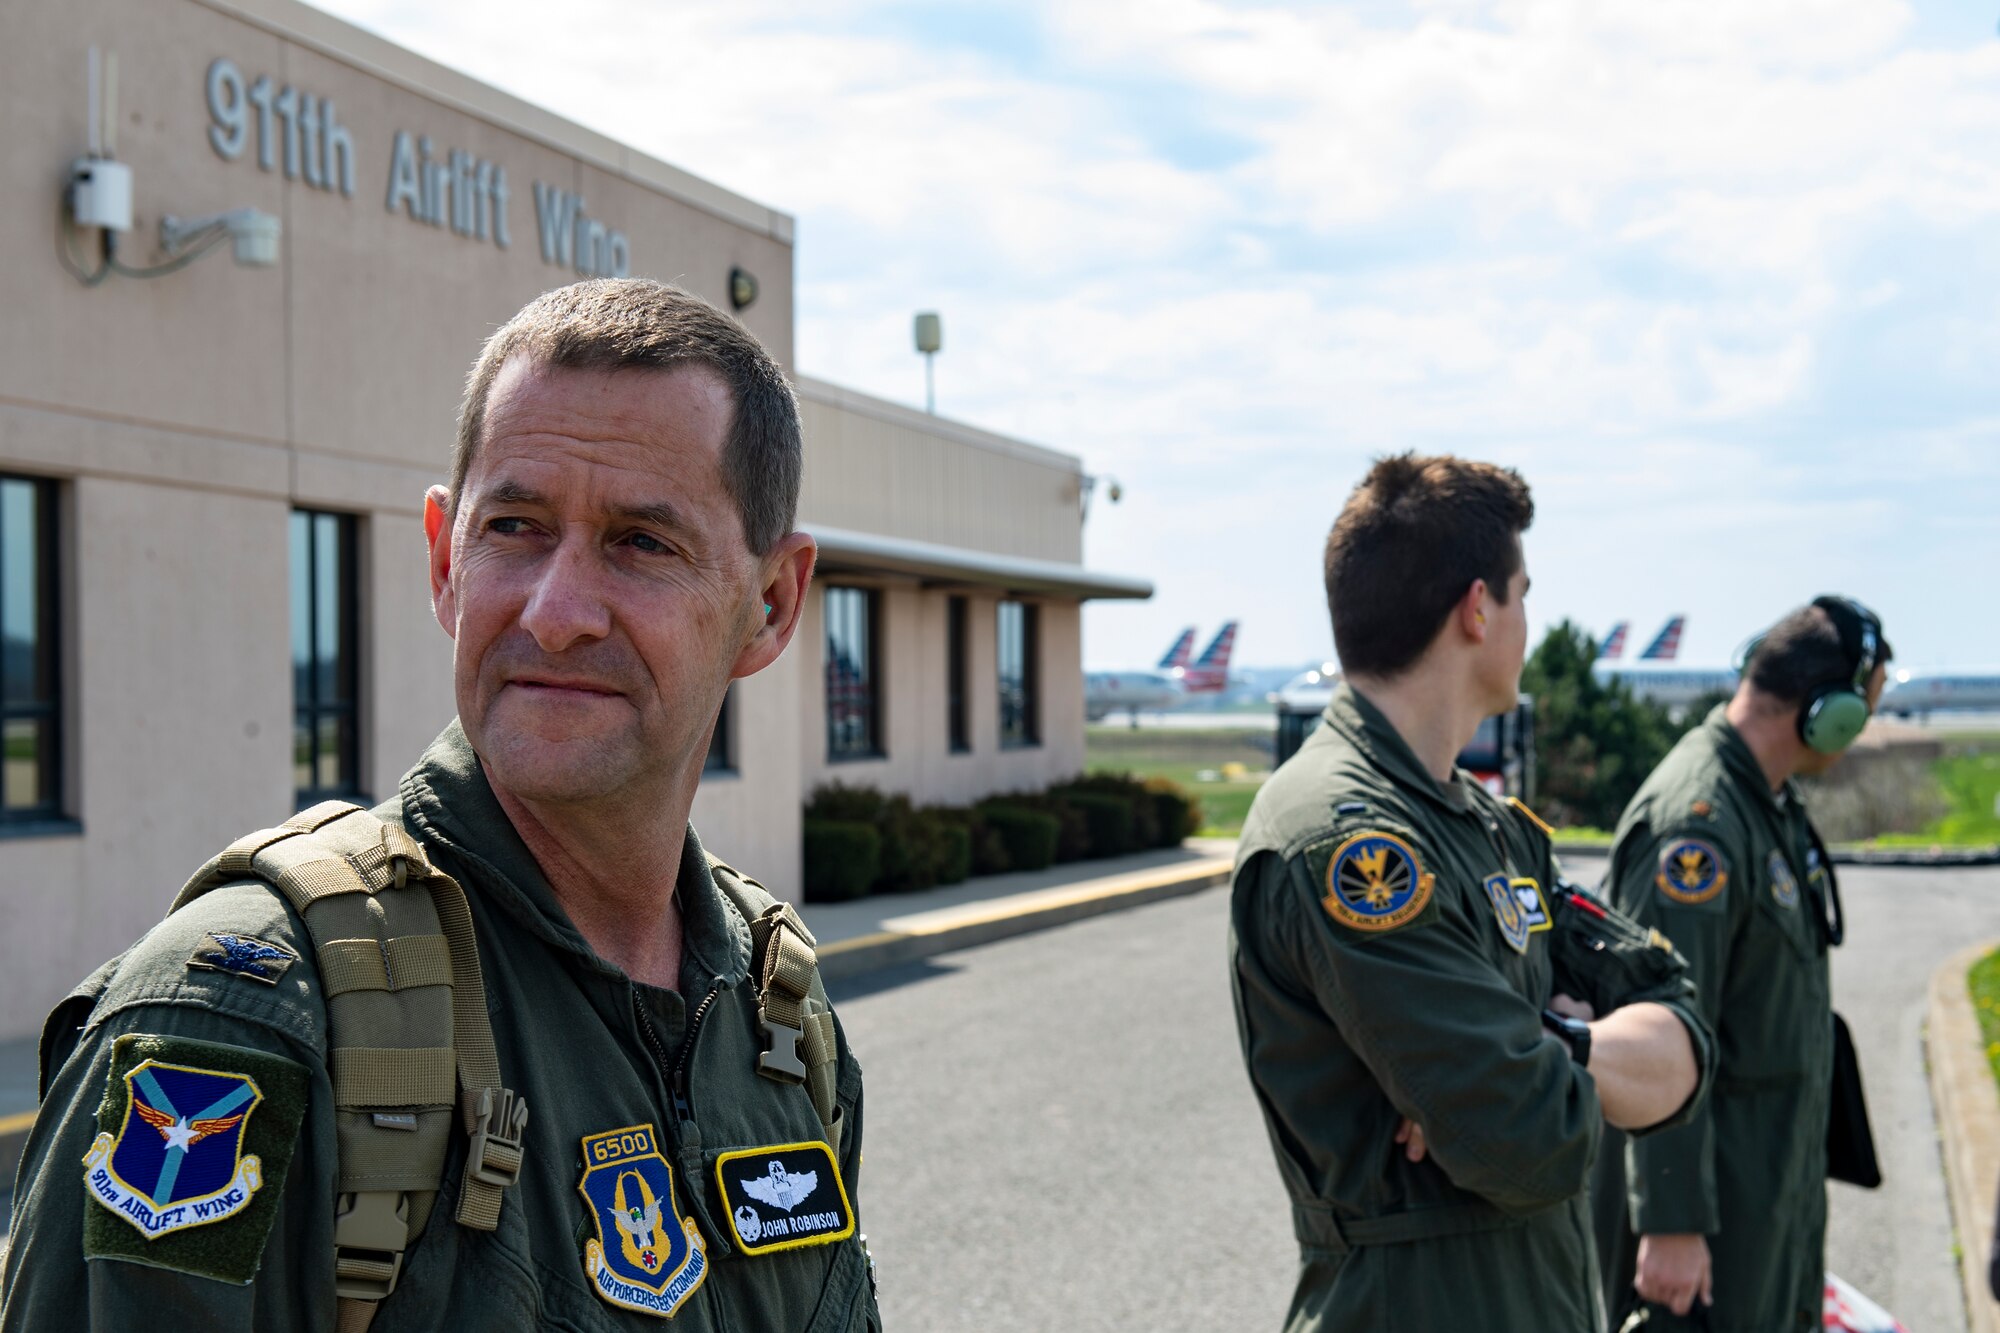 Col. John F. Robinson, 911th Airlift Wing commander, and other aircrew members prepare to transport mobilized Airmen to Joint Base Mcguire-Dix-Lakehurst, New Jersey in support of the COVID-19 efforts from the Pittsburgh International Airport Air Reserve Station, Pennsylvania, April 5, 2020.